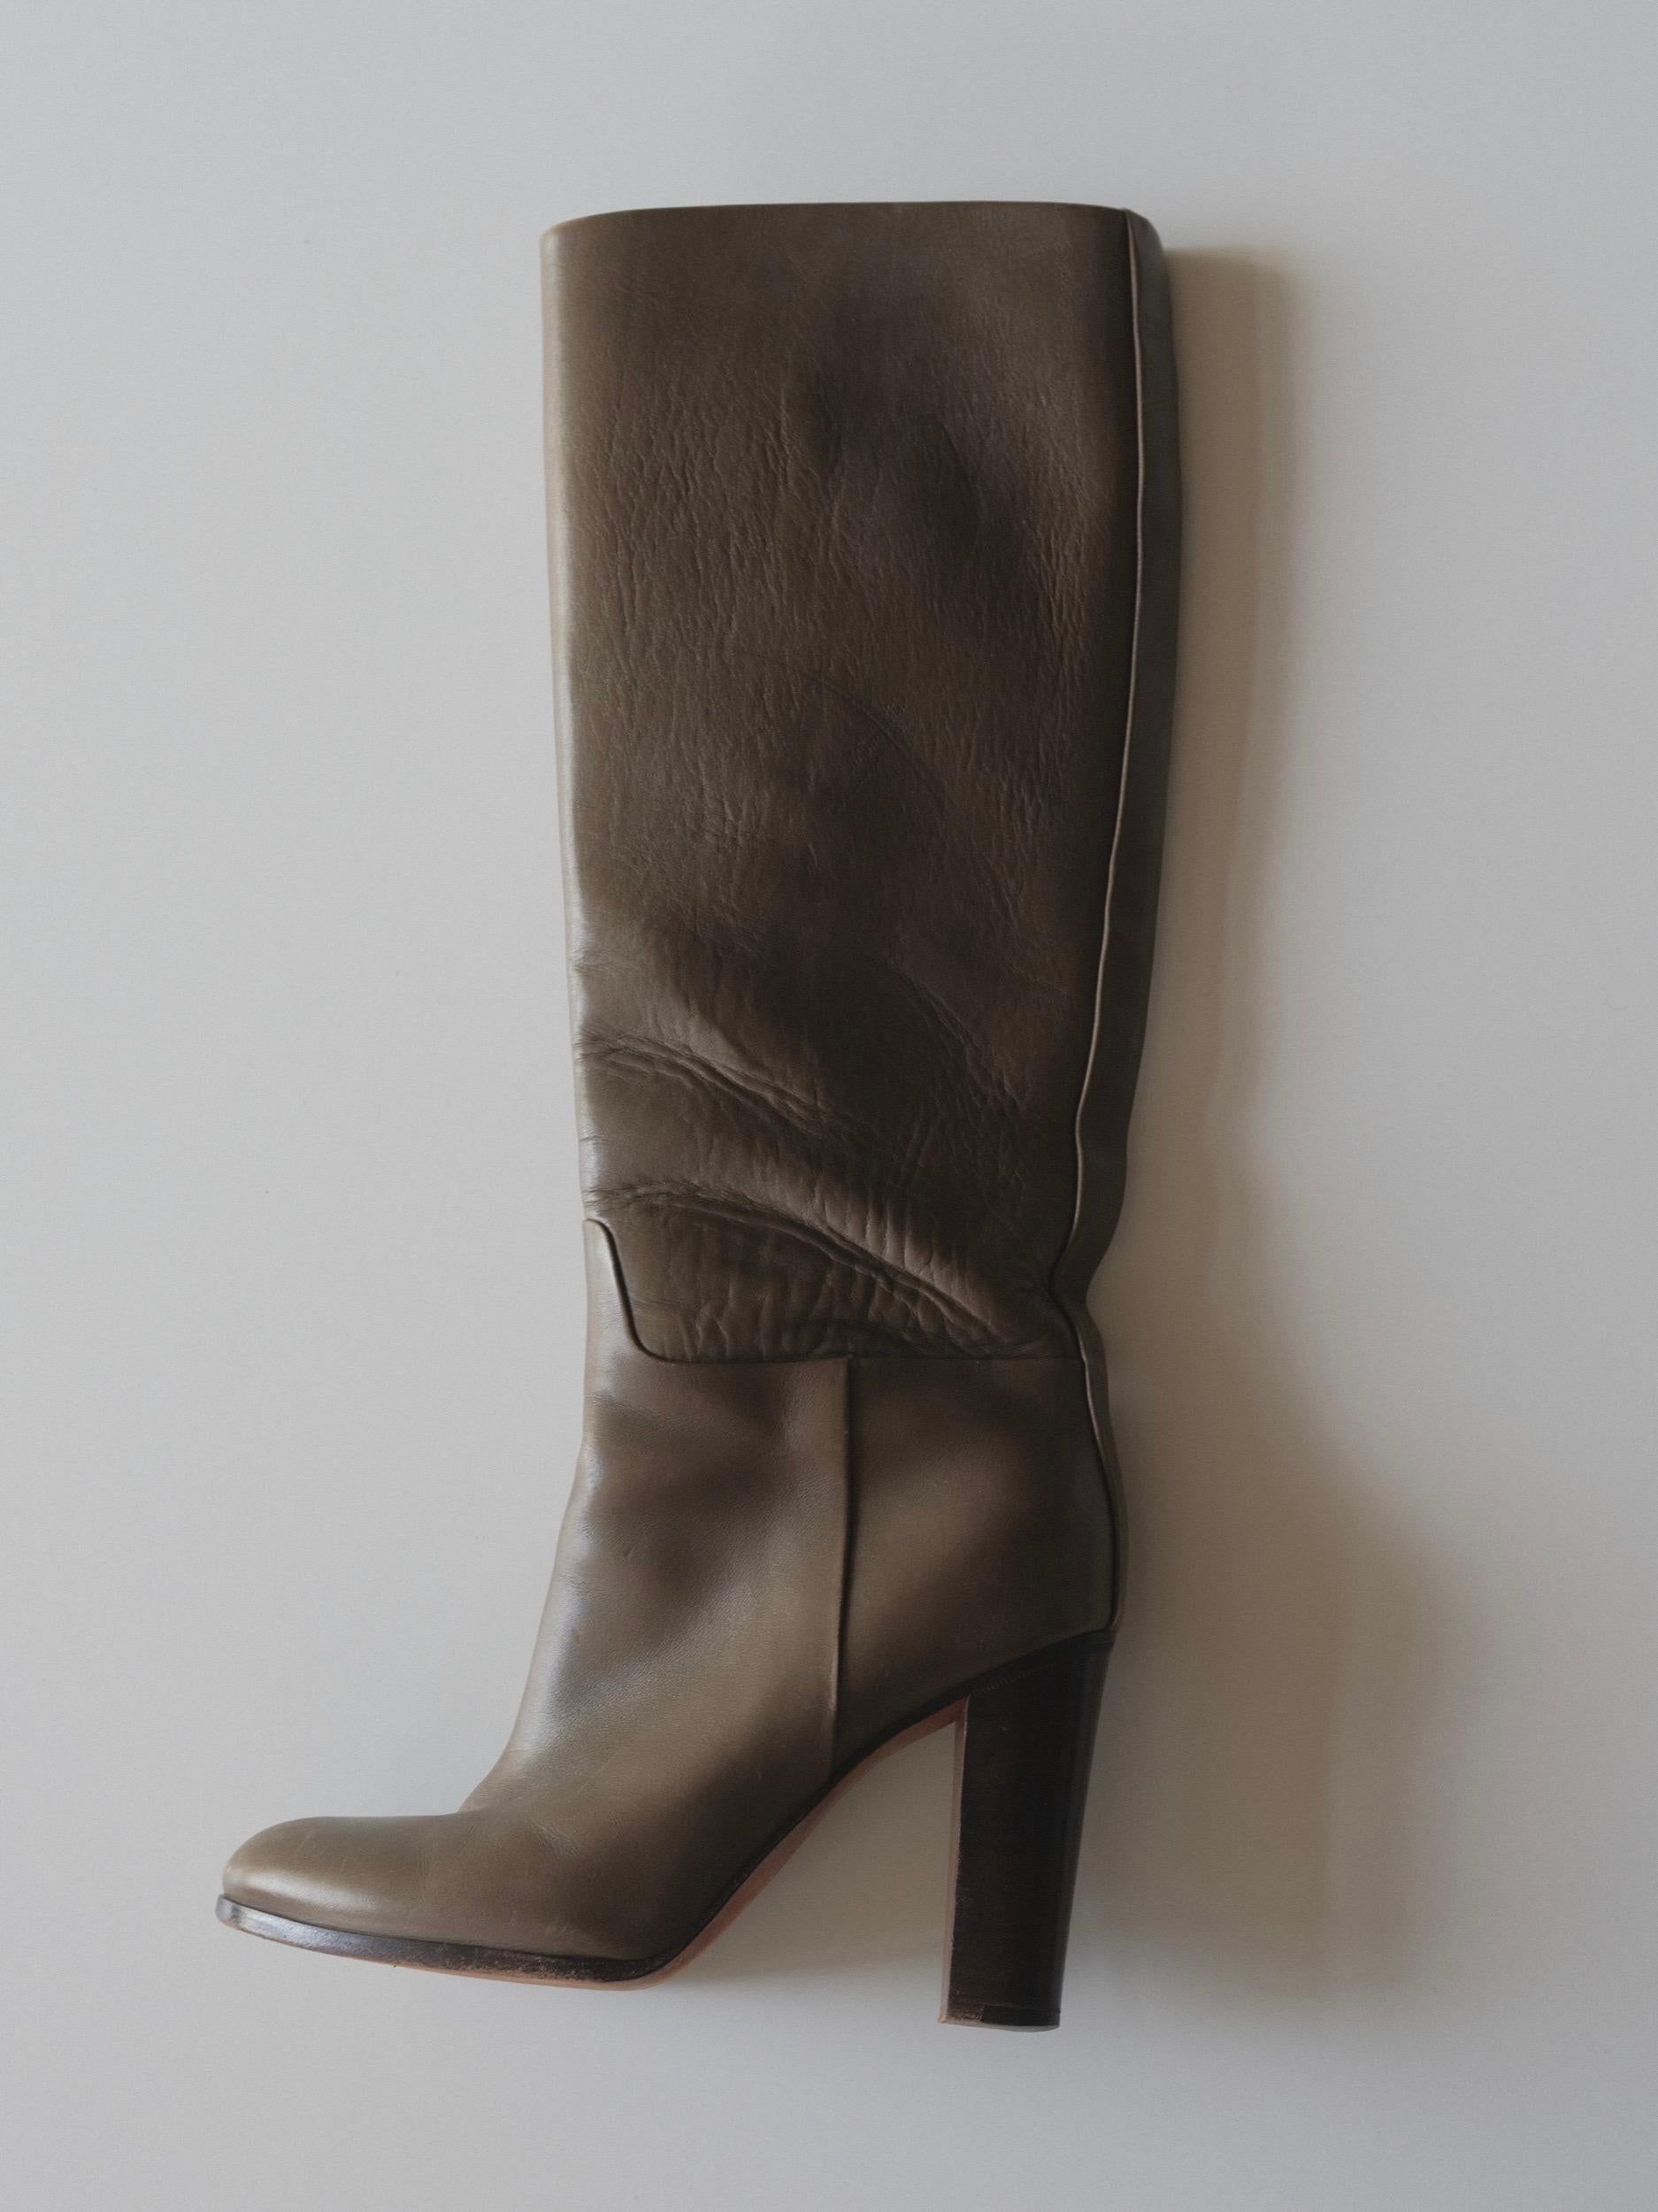 Green Leather Céline Phoebe Philo Knee High Boots 38 For Sale 9